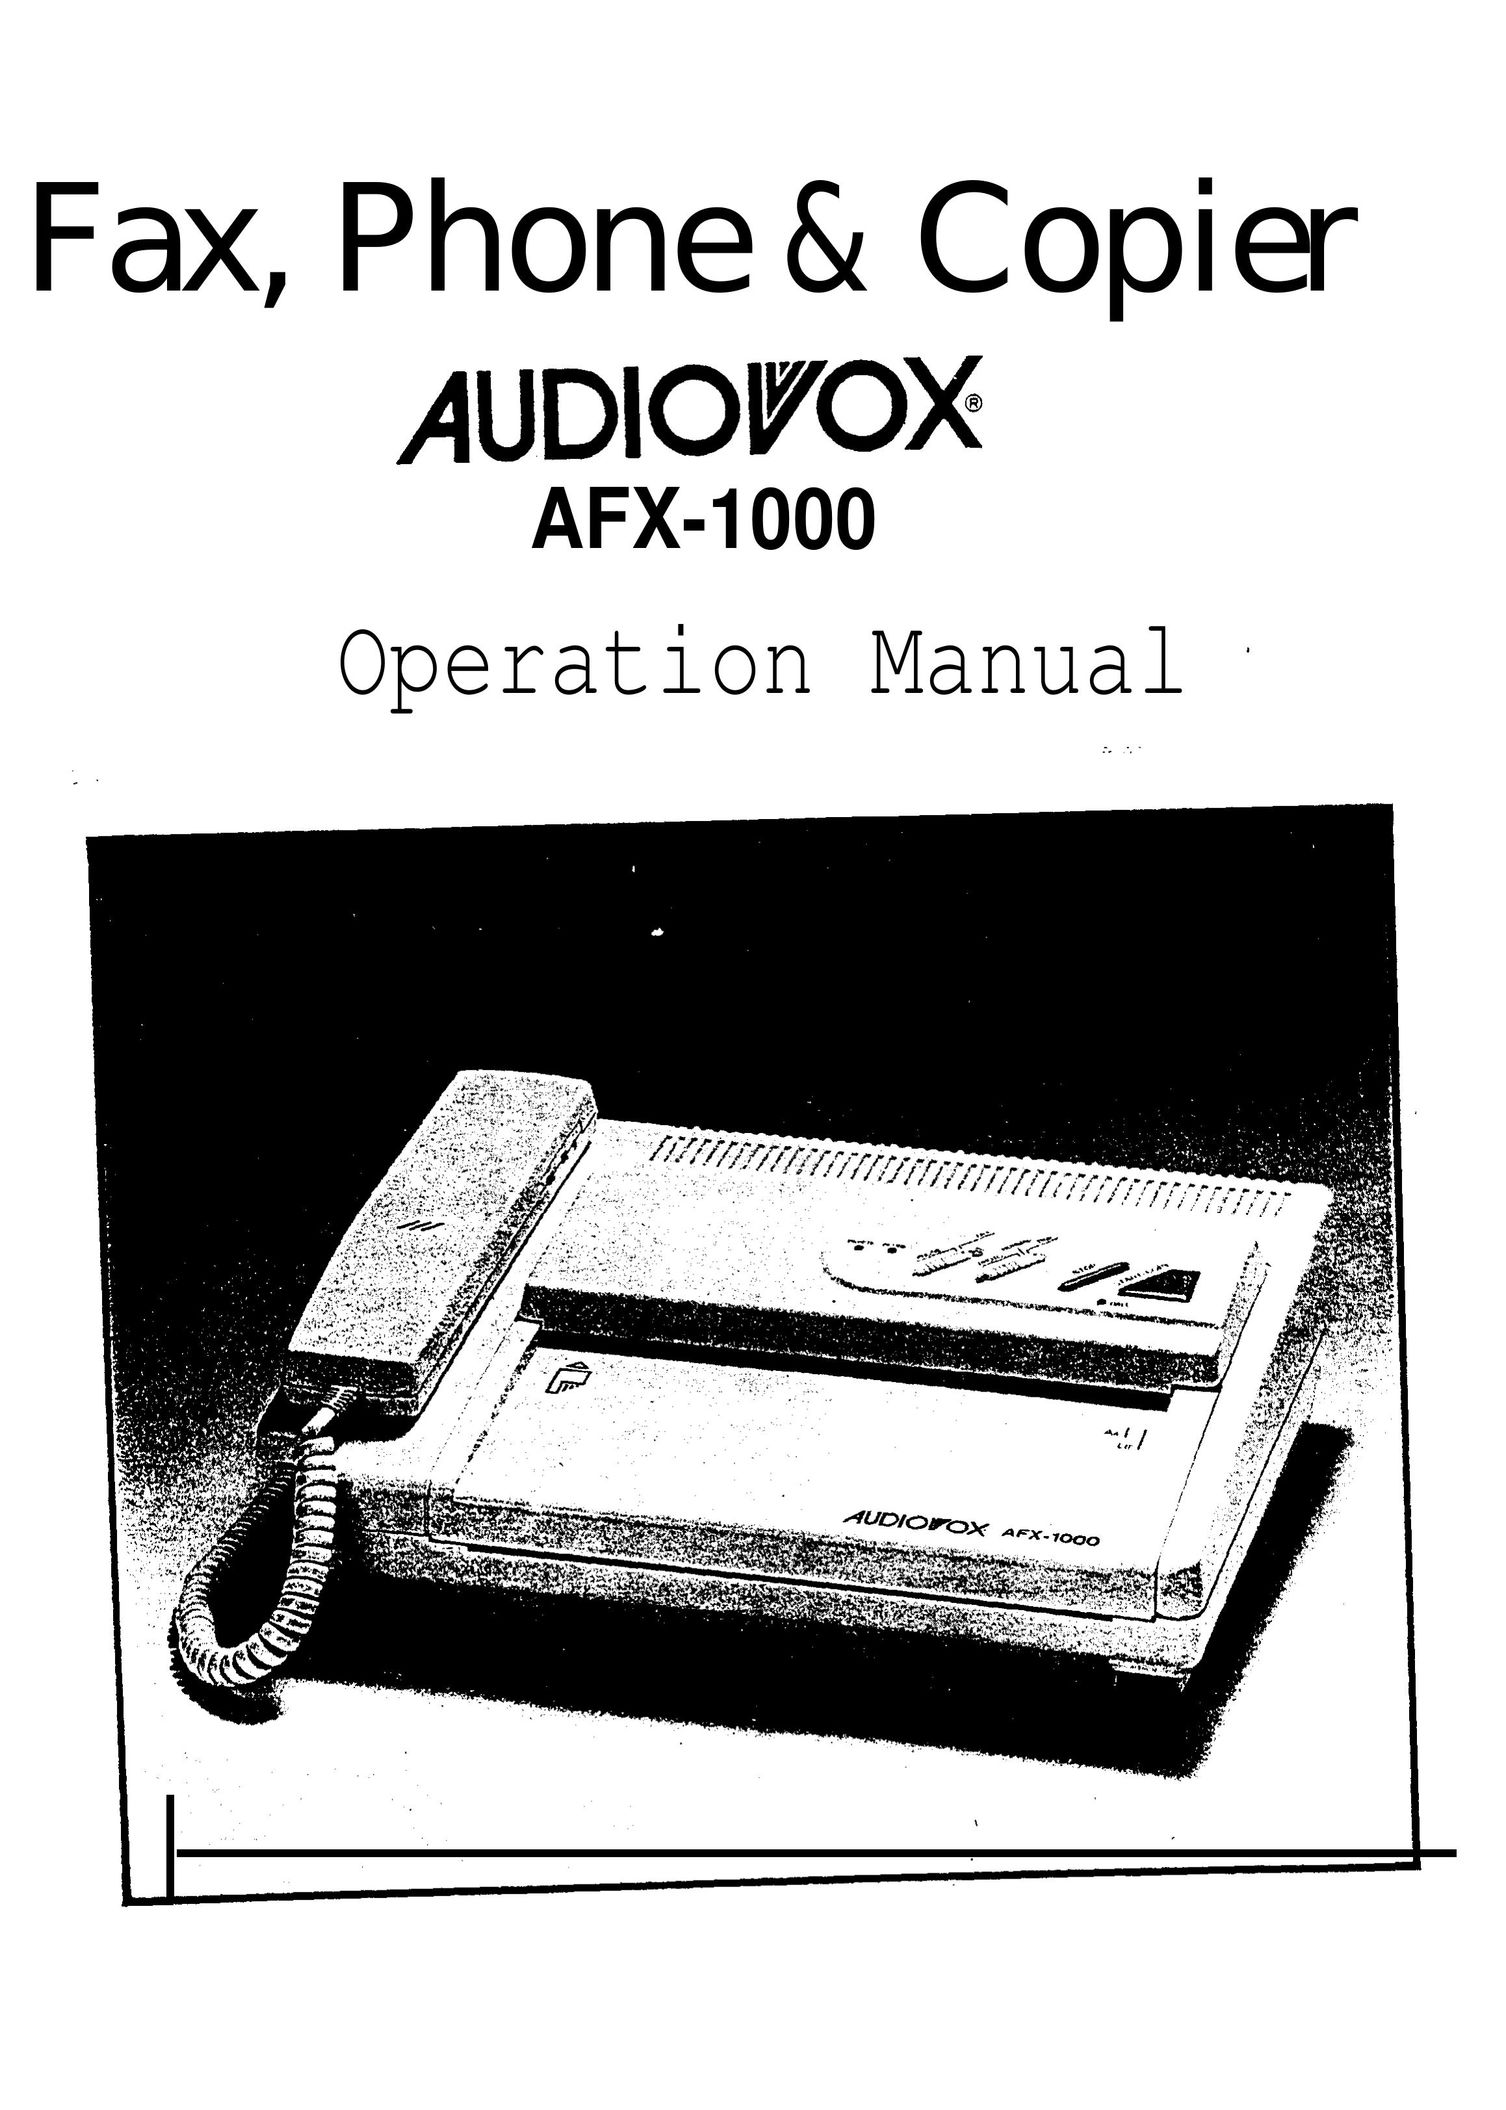 Audiovox AFX-1000 All in One Printer User Manual